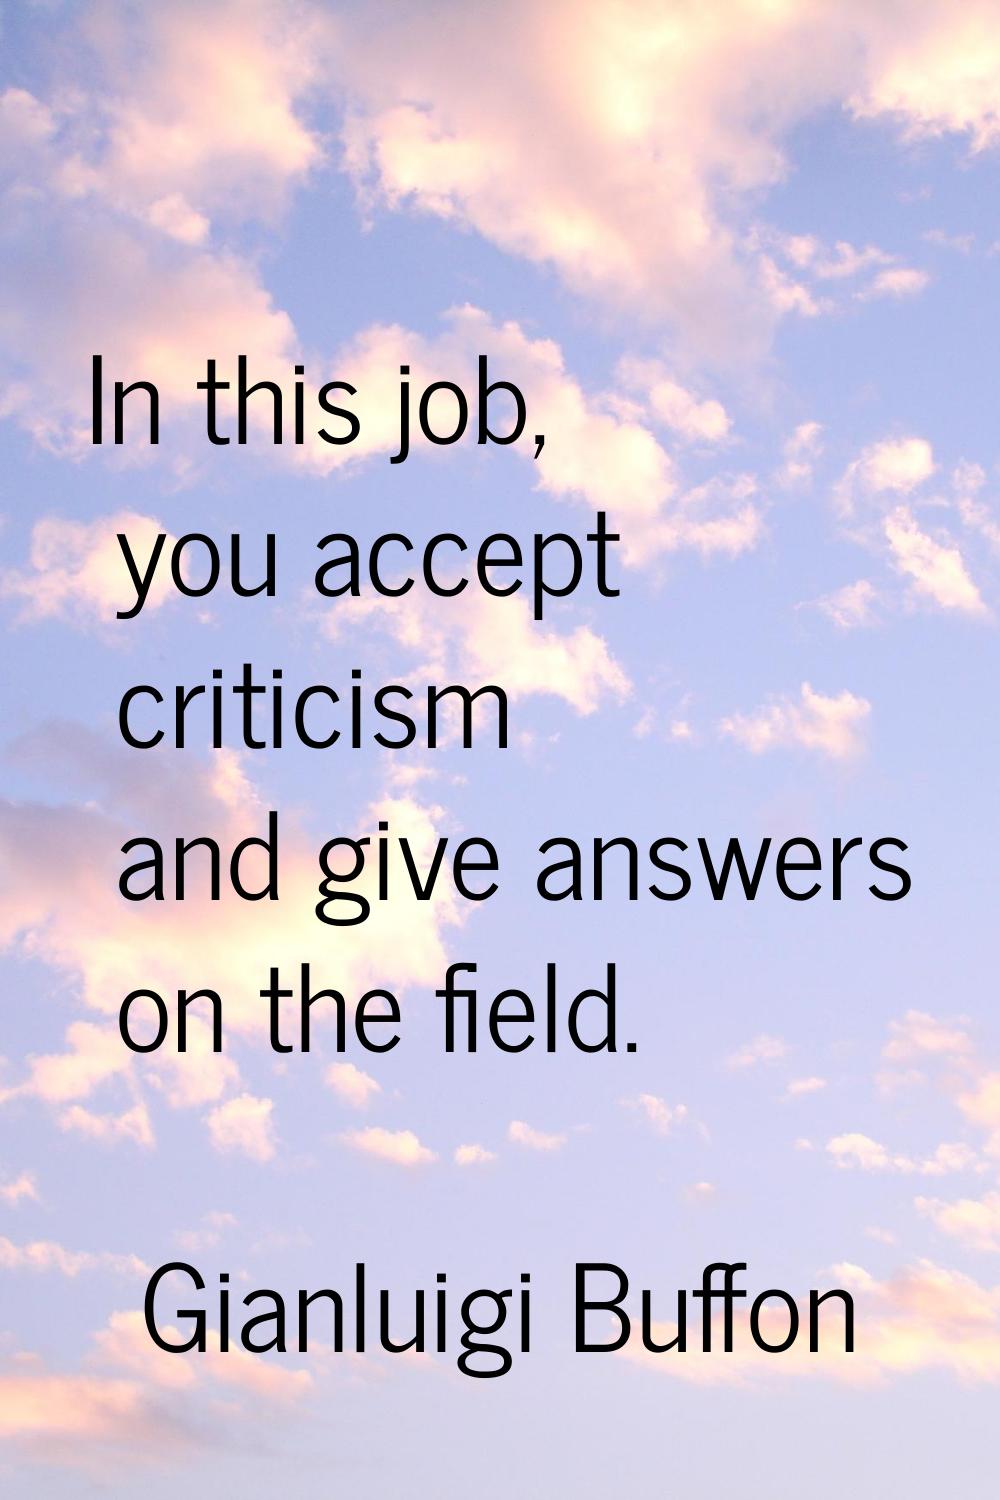 In this job, you accept criticism and give answers on the field.